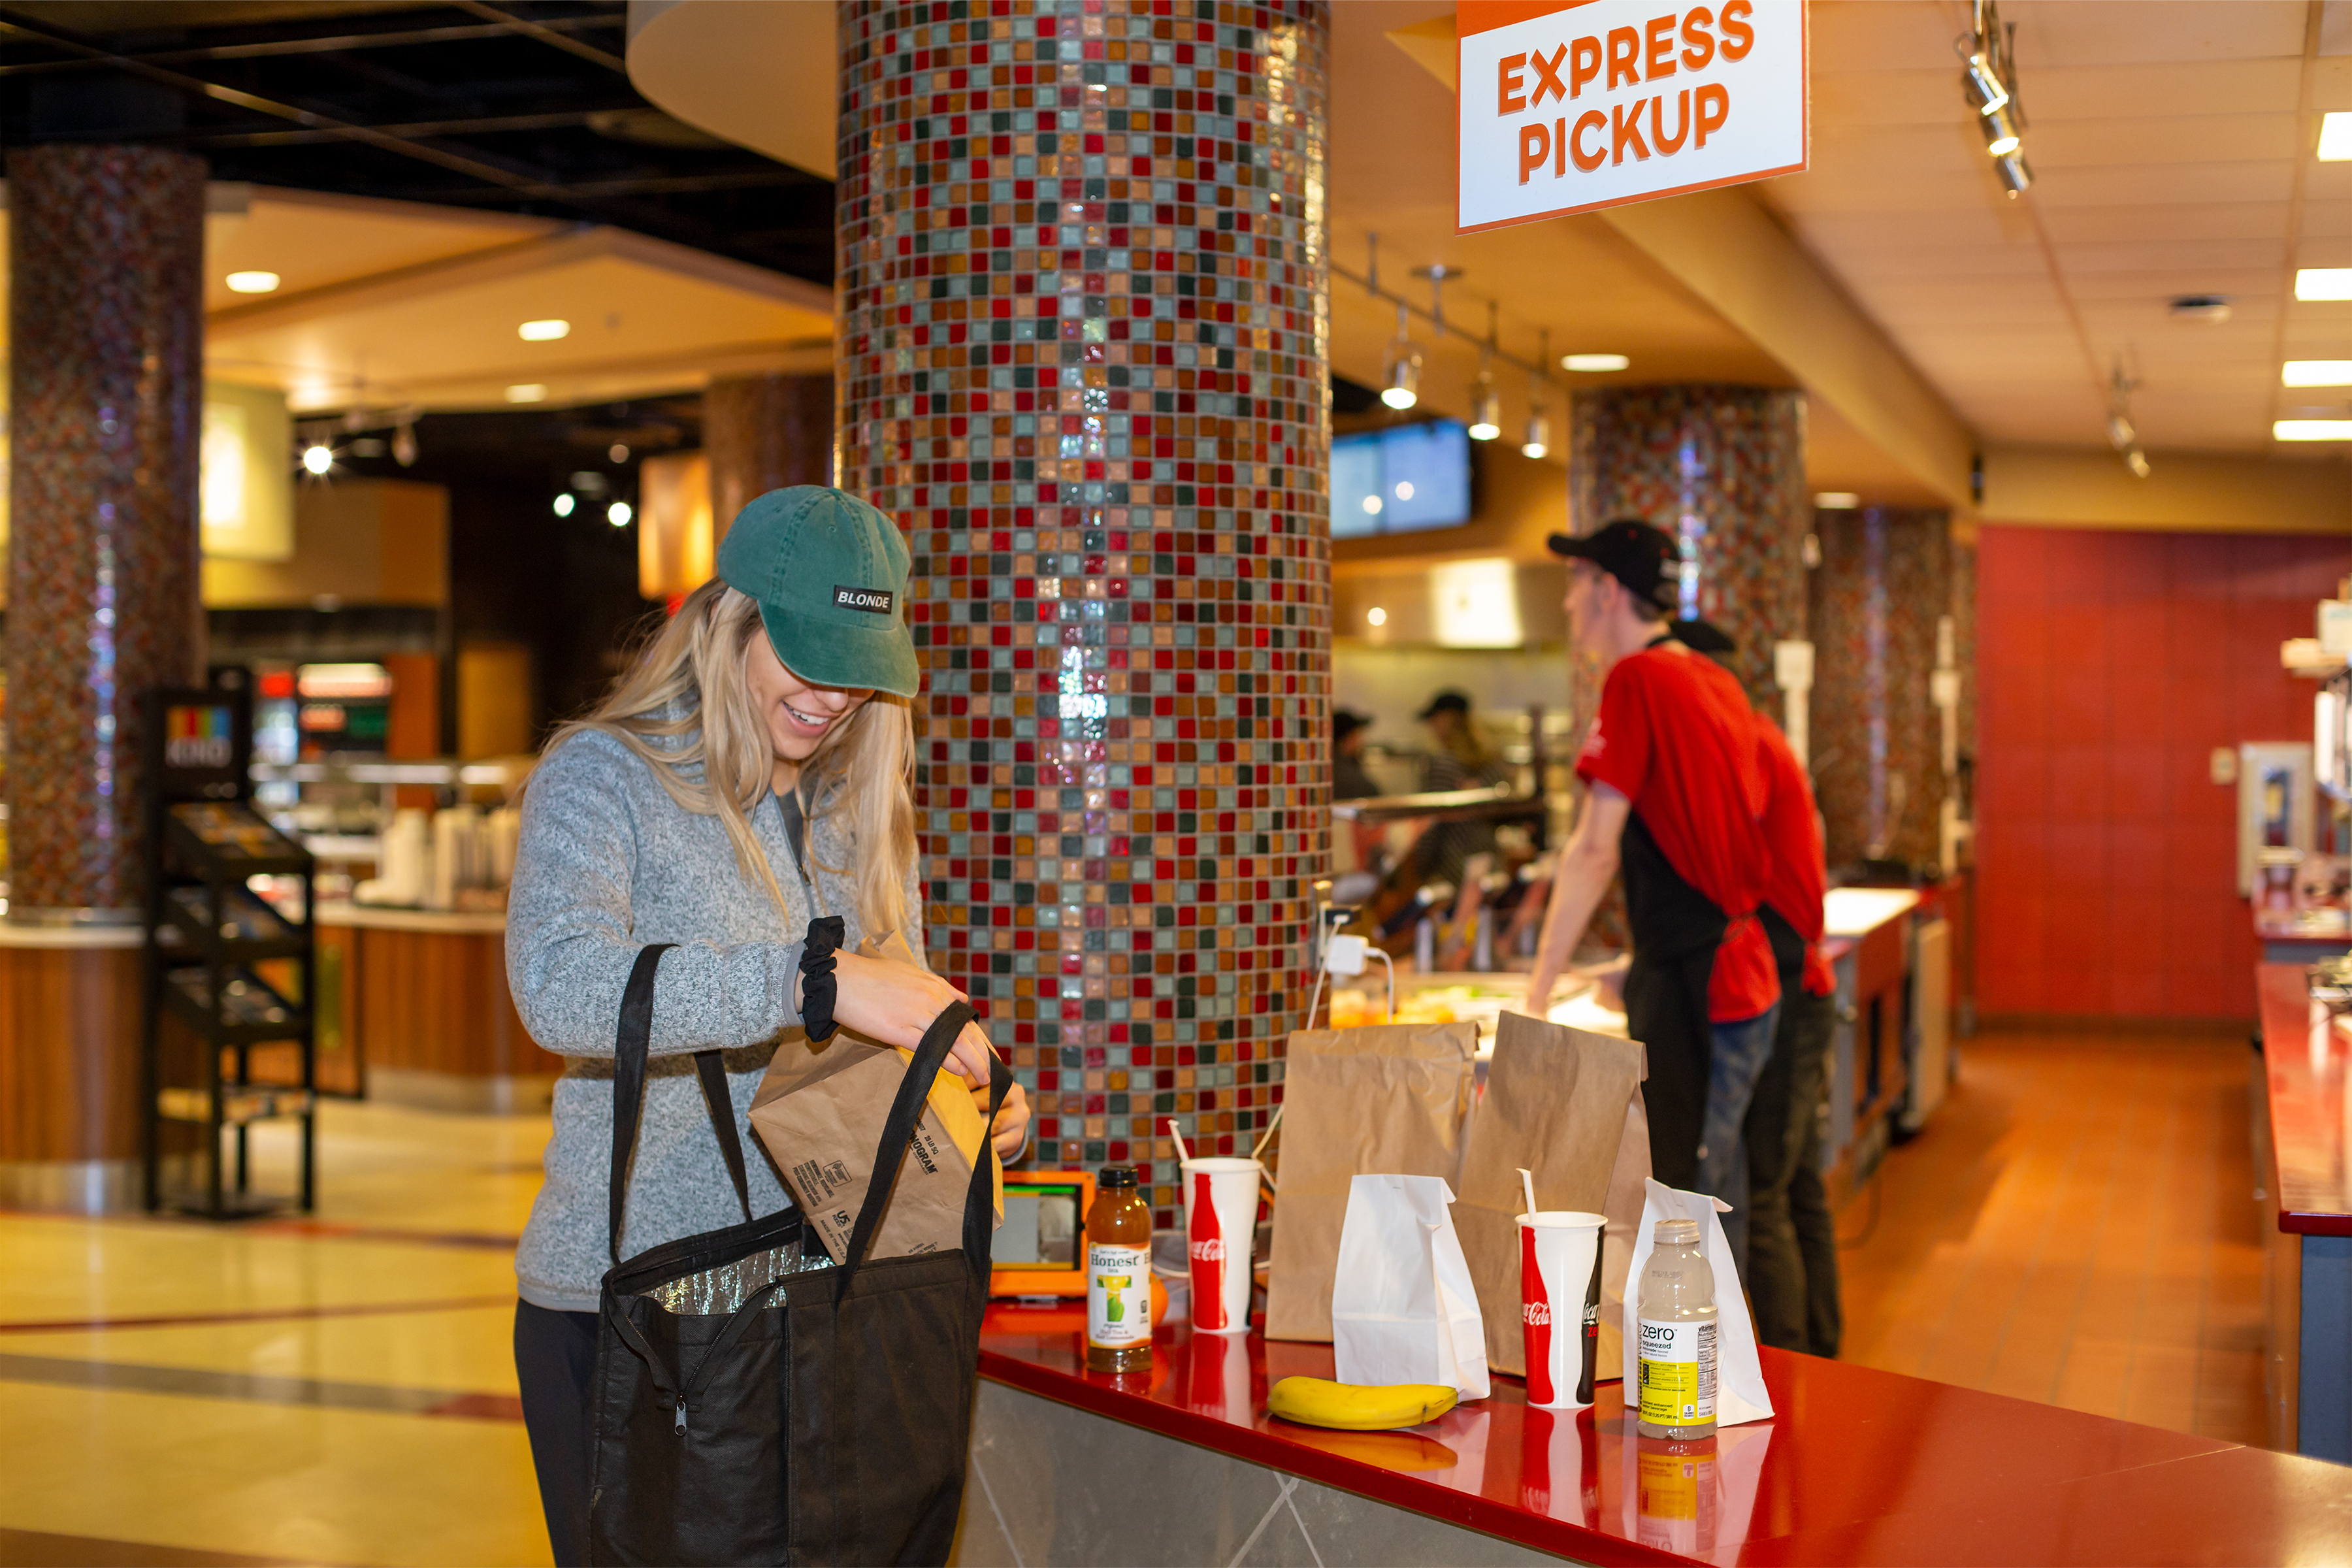 MEAL TO GO—On peak days at Ohio State U, about 8,000 mobile food orders are placed via an app, which estimates order pickup time so students can be in and out quickly.